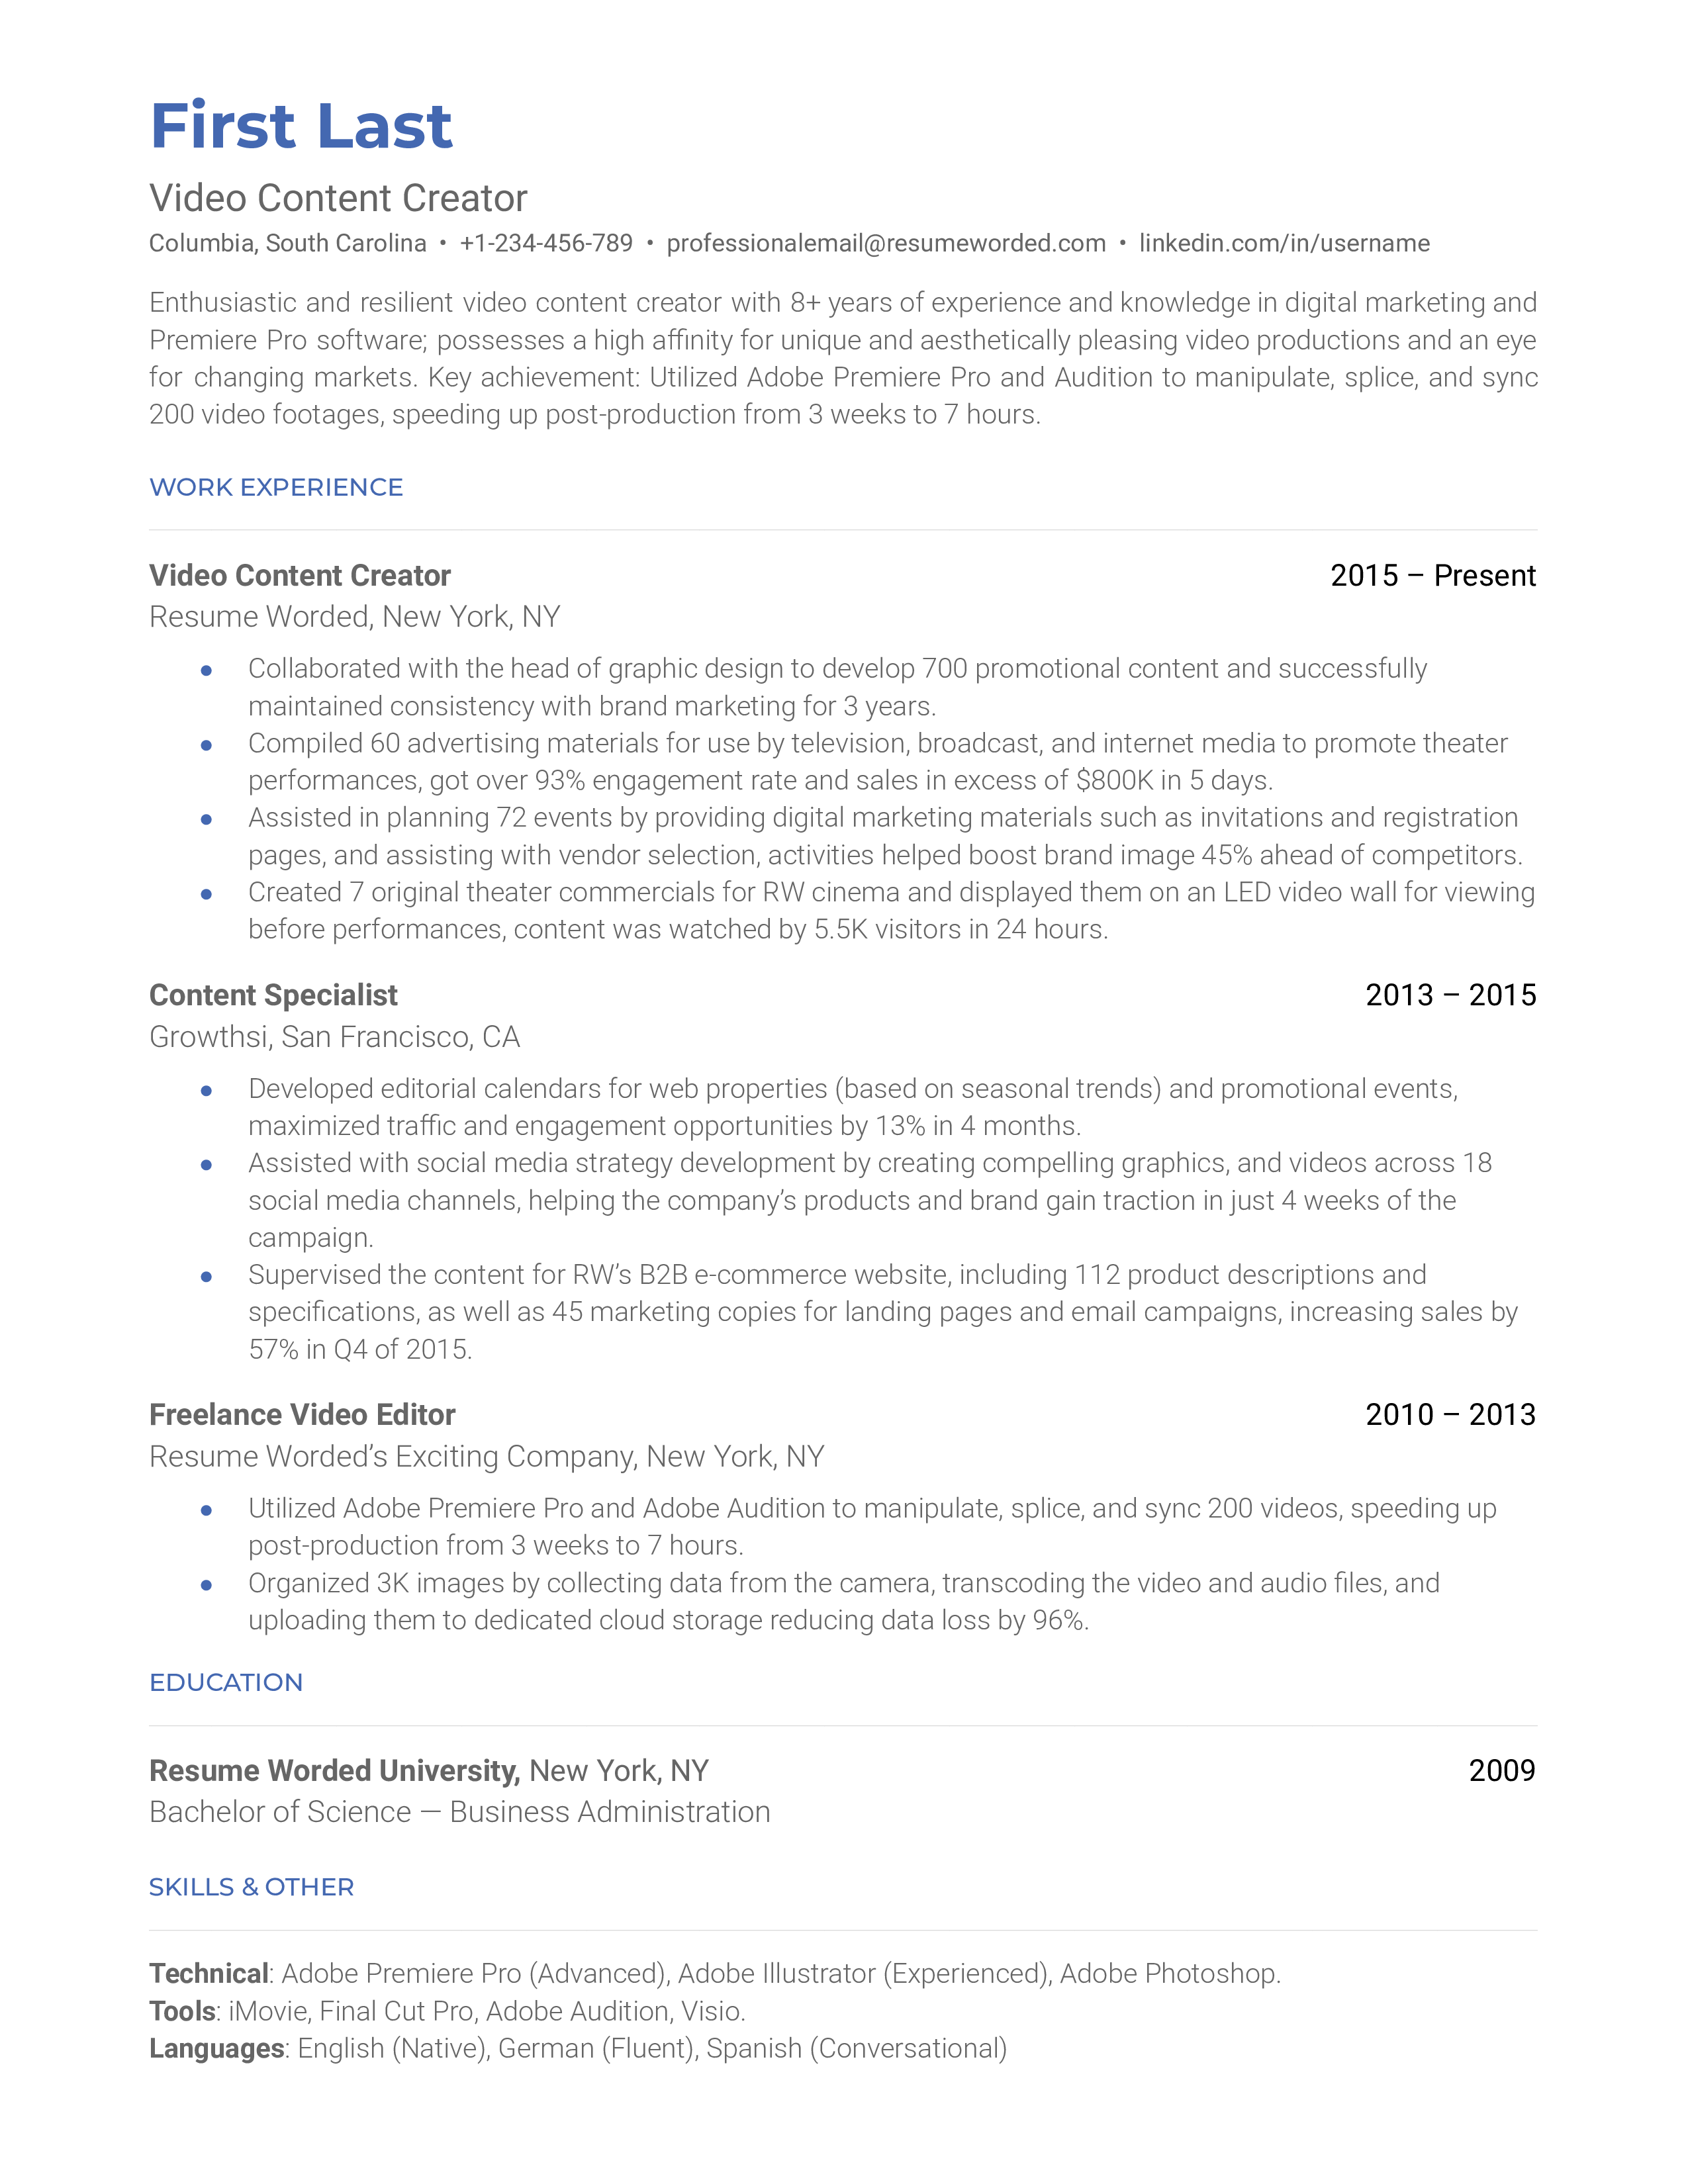 Video content creator resume sample that highlights experience in video production and software program experience.